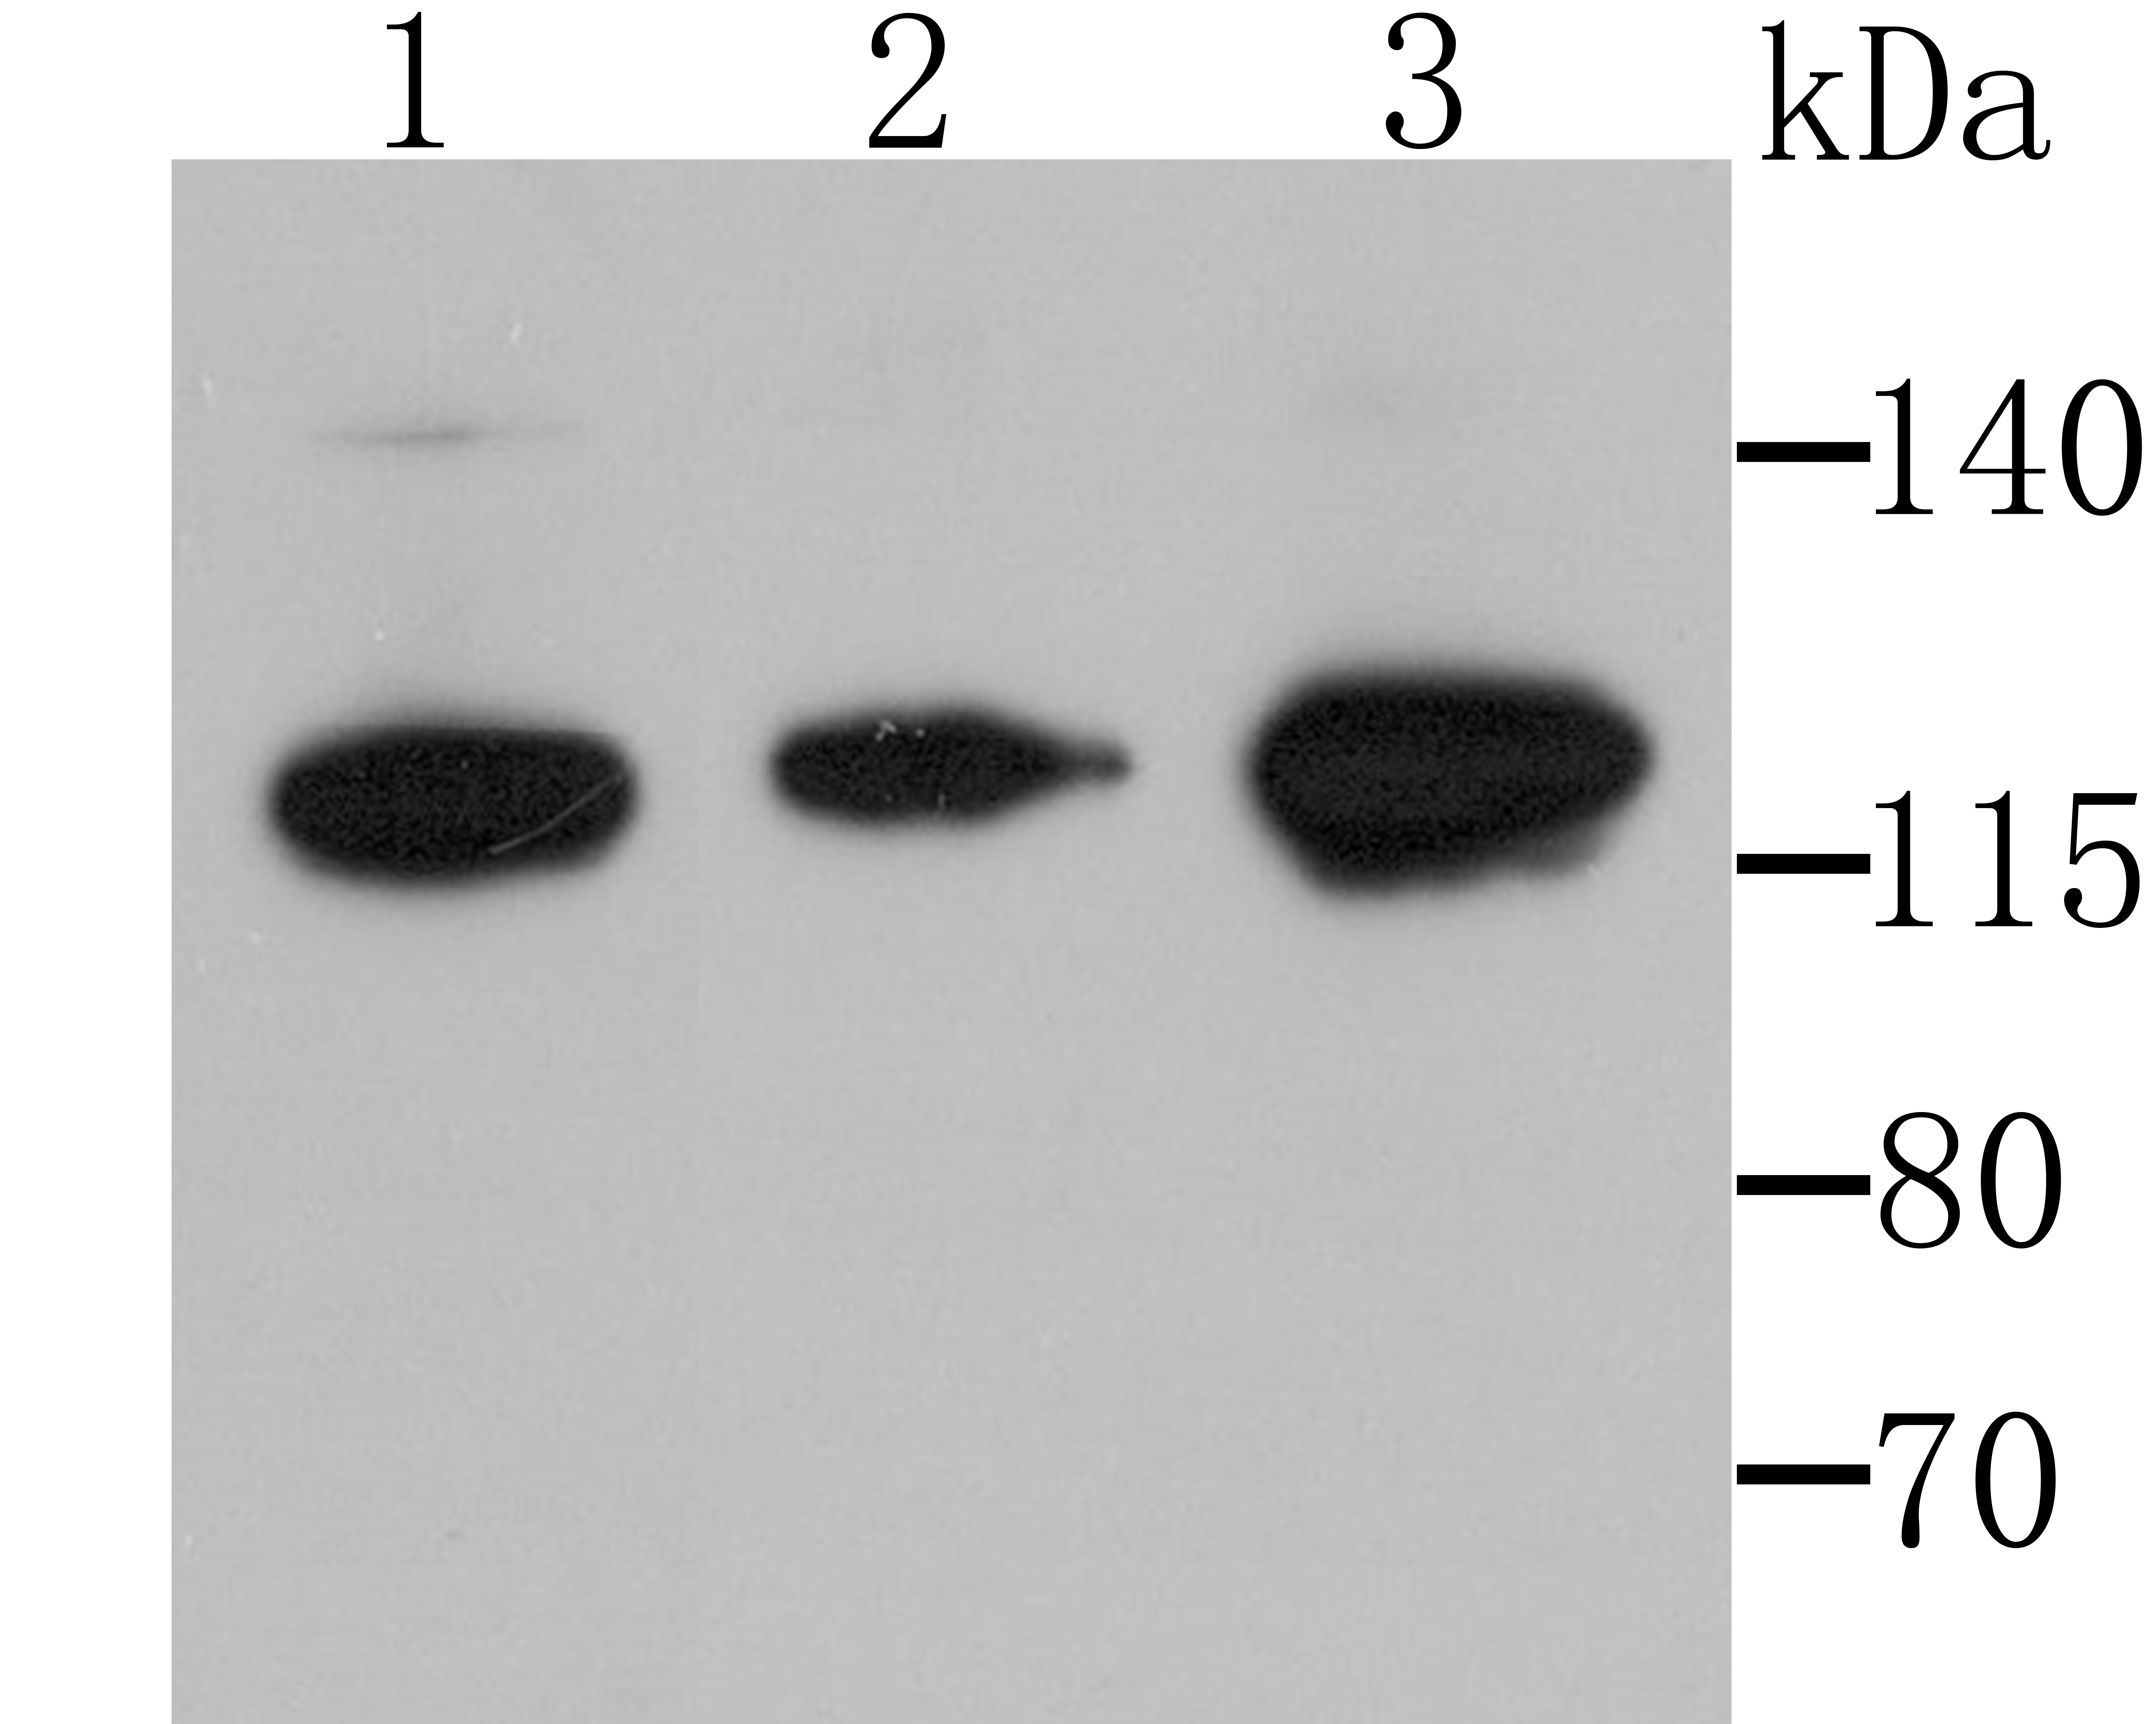 Western blot analysis of Hip1 on different tissue lysates using anti-Hip1 antibody at 1/500 dilution.<br />
 Positive control:<br />
 Lane 1: Mouse testis <br />
   Lane 2: Mouse spinal cord <br />
 Lane 3: SH-SY5Y